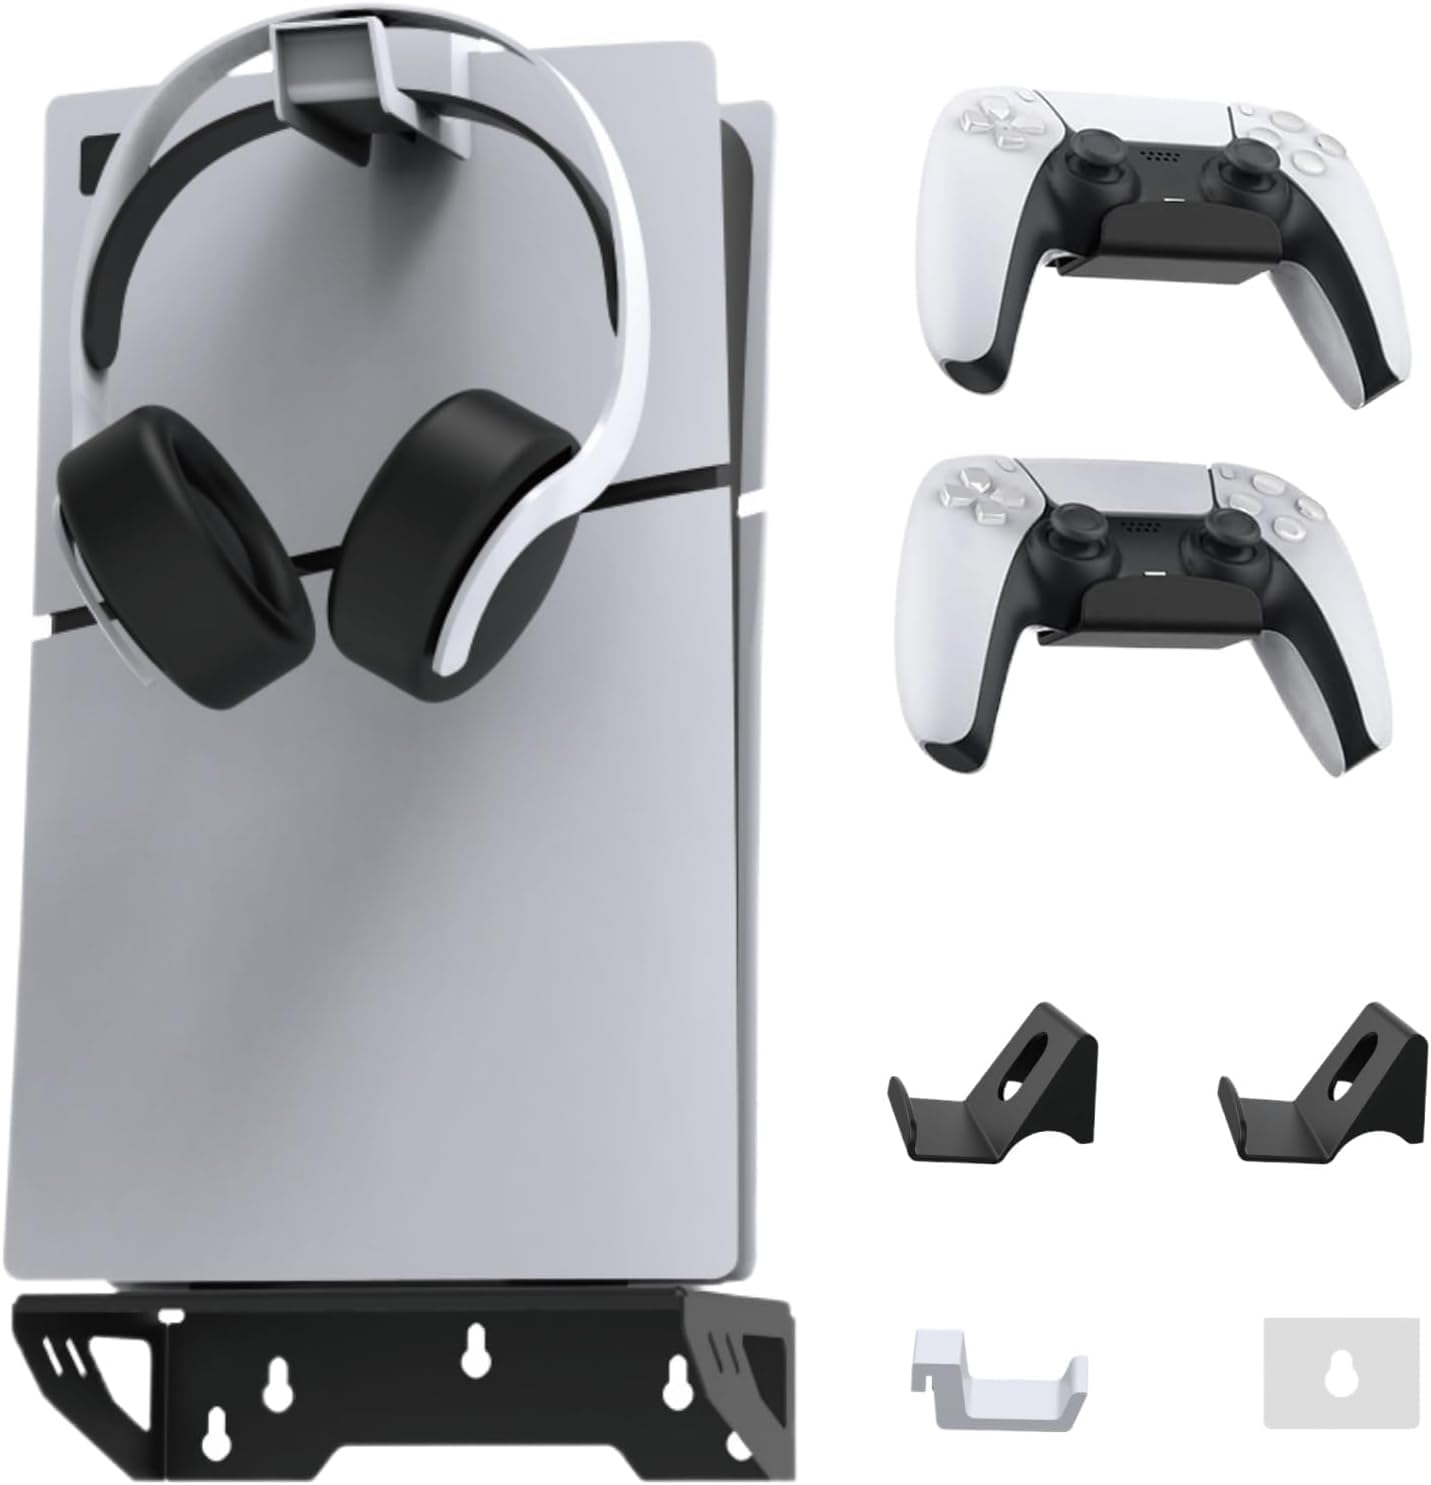 New World Wall Mount Bracket , Wall stand for PS5 Slim,PS5 Normal (Disc and Digital Edition), with Controller holder and Headphone holder